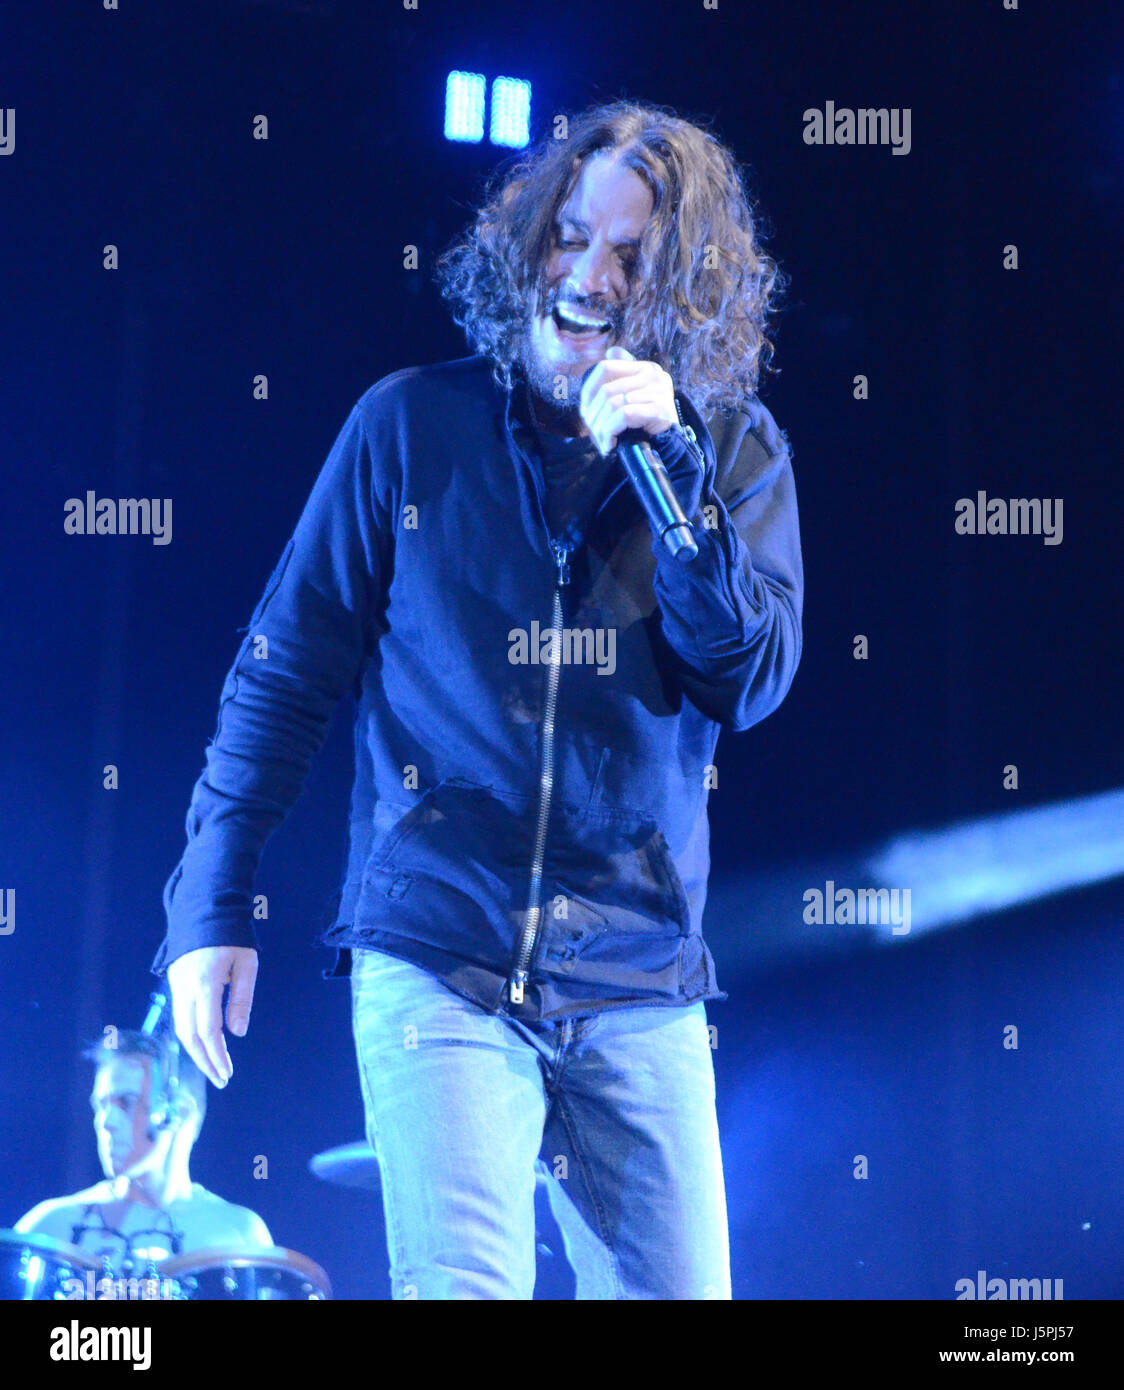 May 13, 2017: Singer and songwriter Chris Cornell performs with his band Soundgarden during the Northern Invasion Music Festival in Somerset, Wisconsin. Ricky Bassman/Cal Sport Media Stock Photo